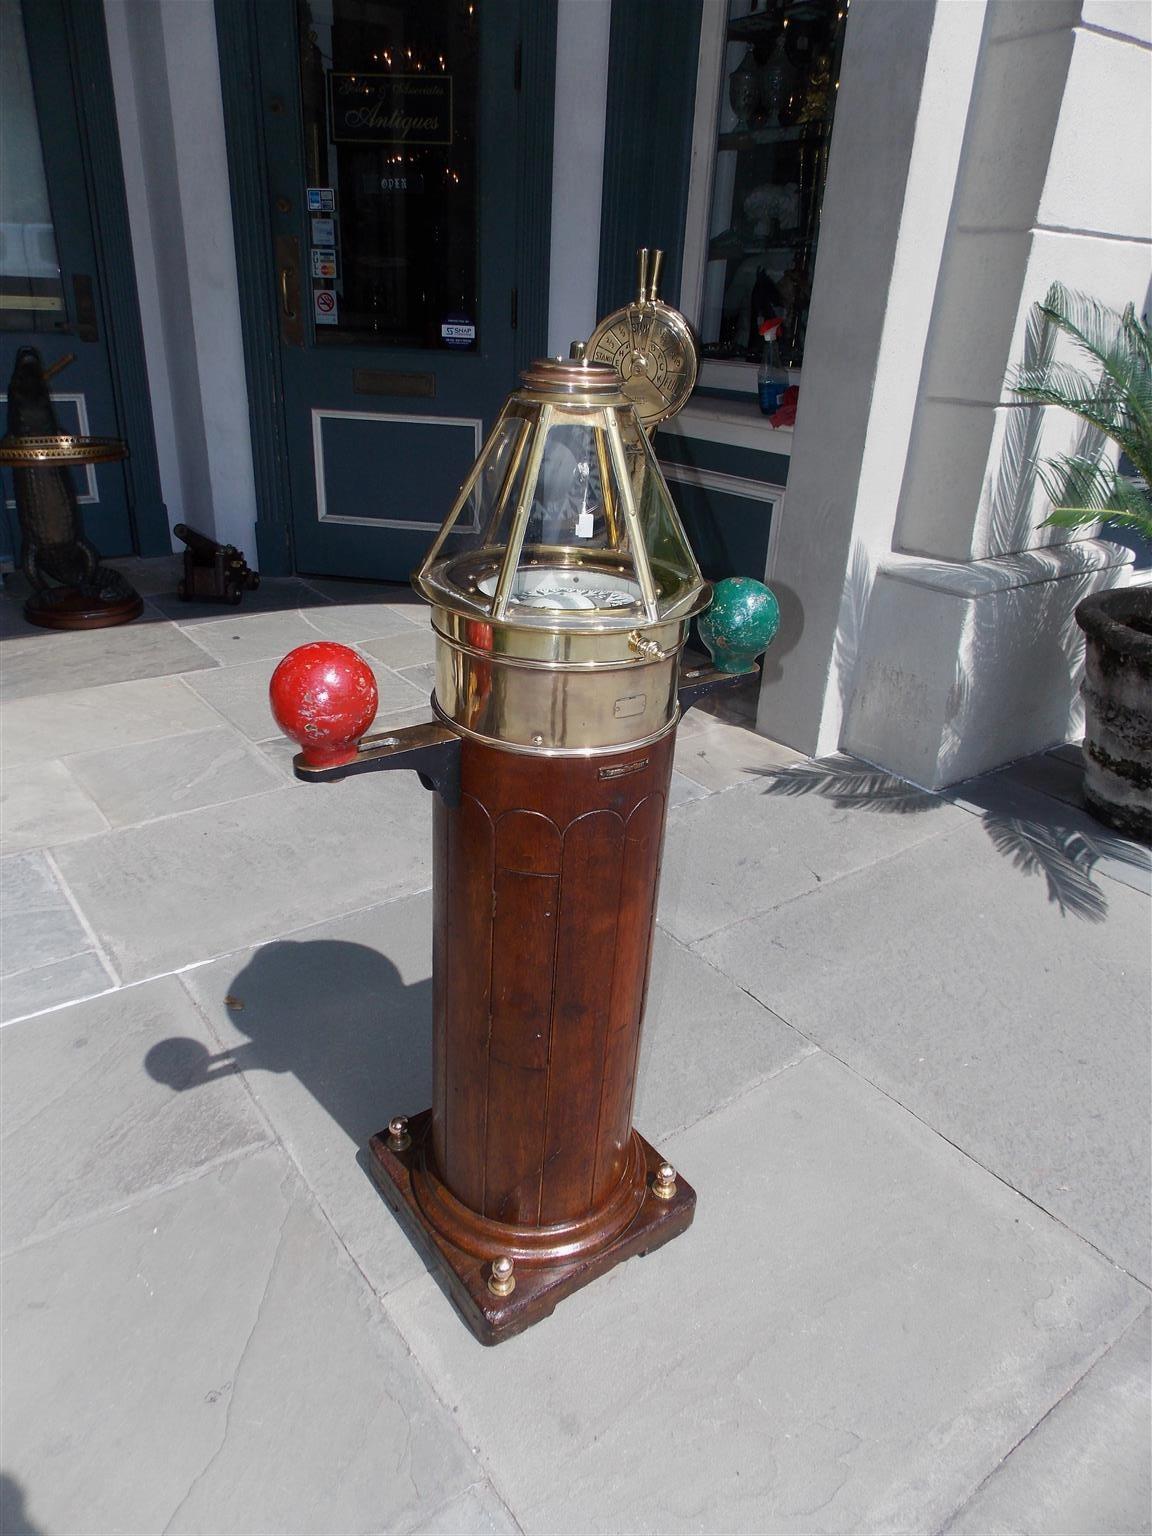 American mahogany and brass skylight ship binnacle. T.S. and J.D. Negus company was established in 1848 in New York City. They were makers of fine scientific instruments, circa 1848-1900. This highly desirable and maritime instrument is made of